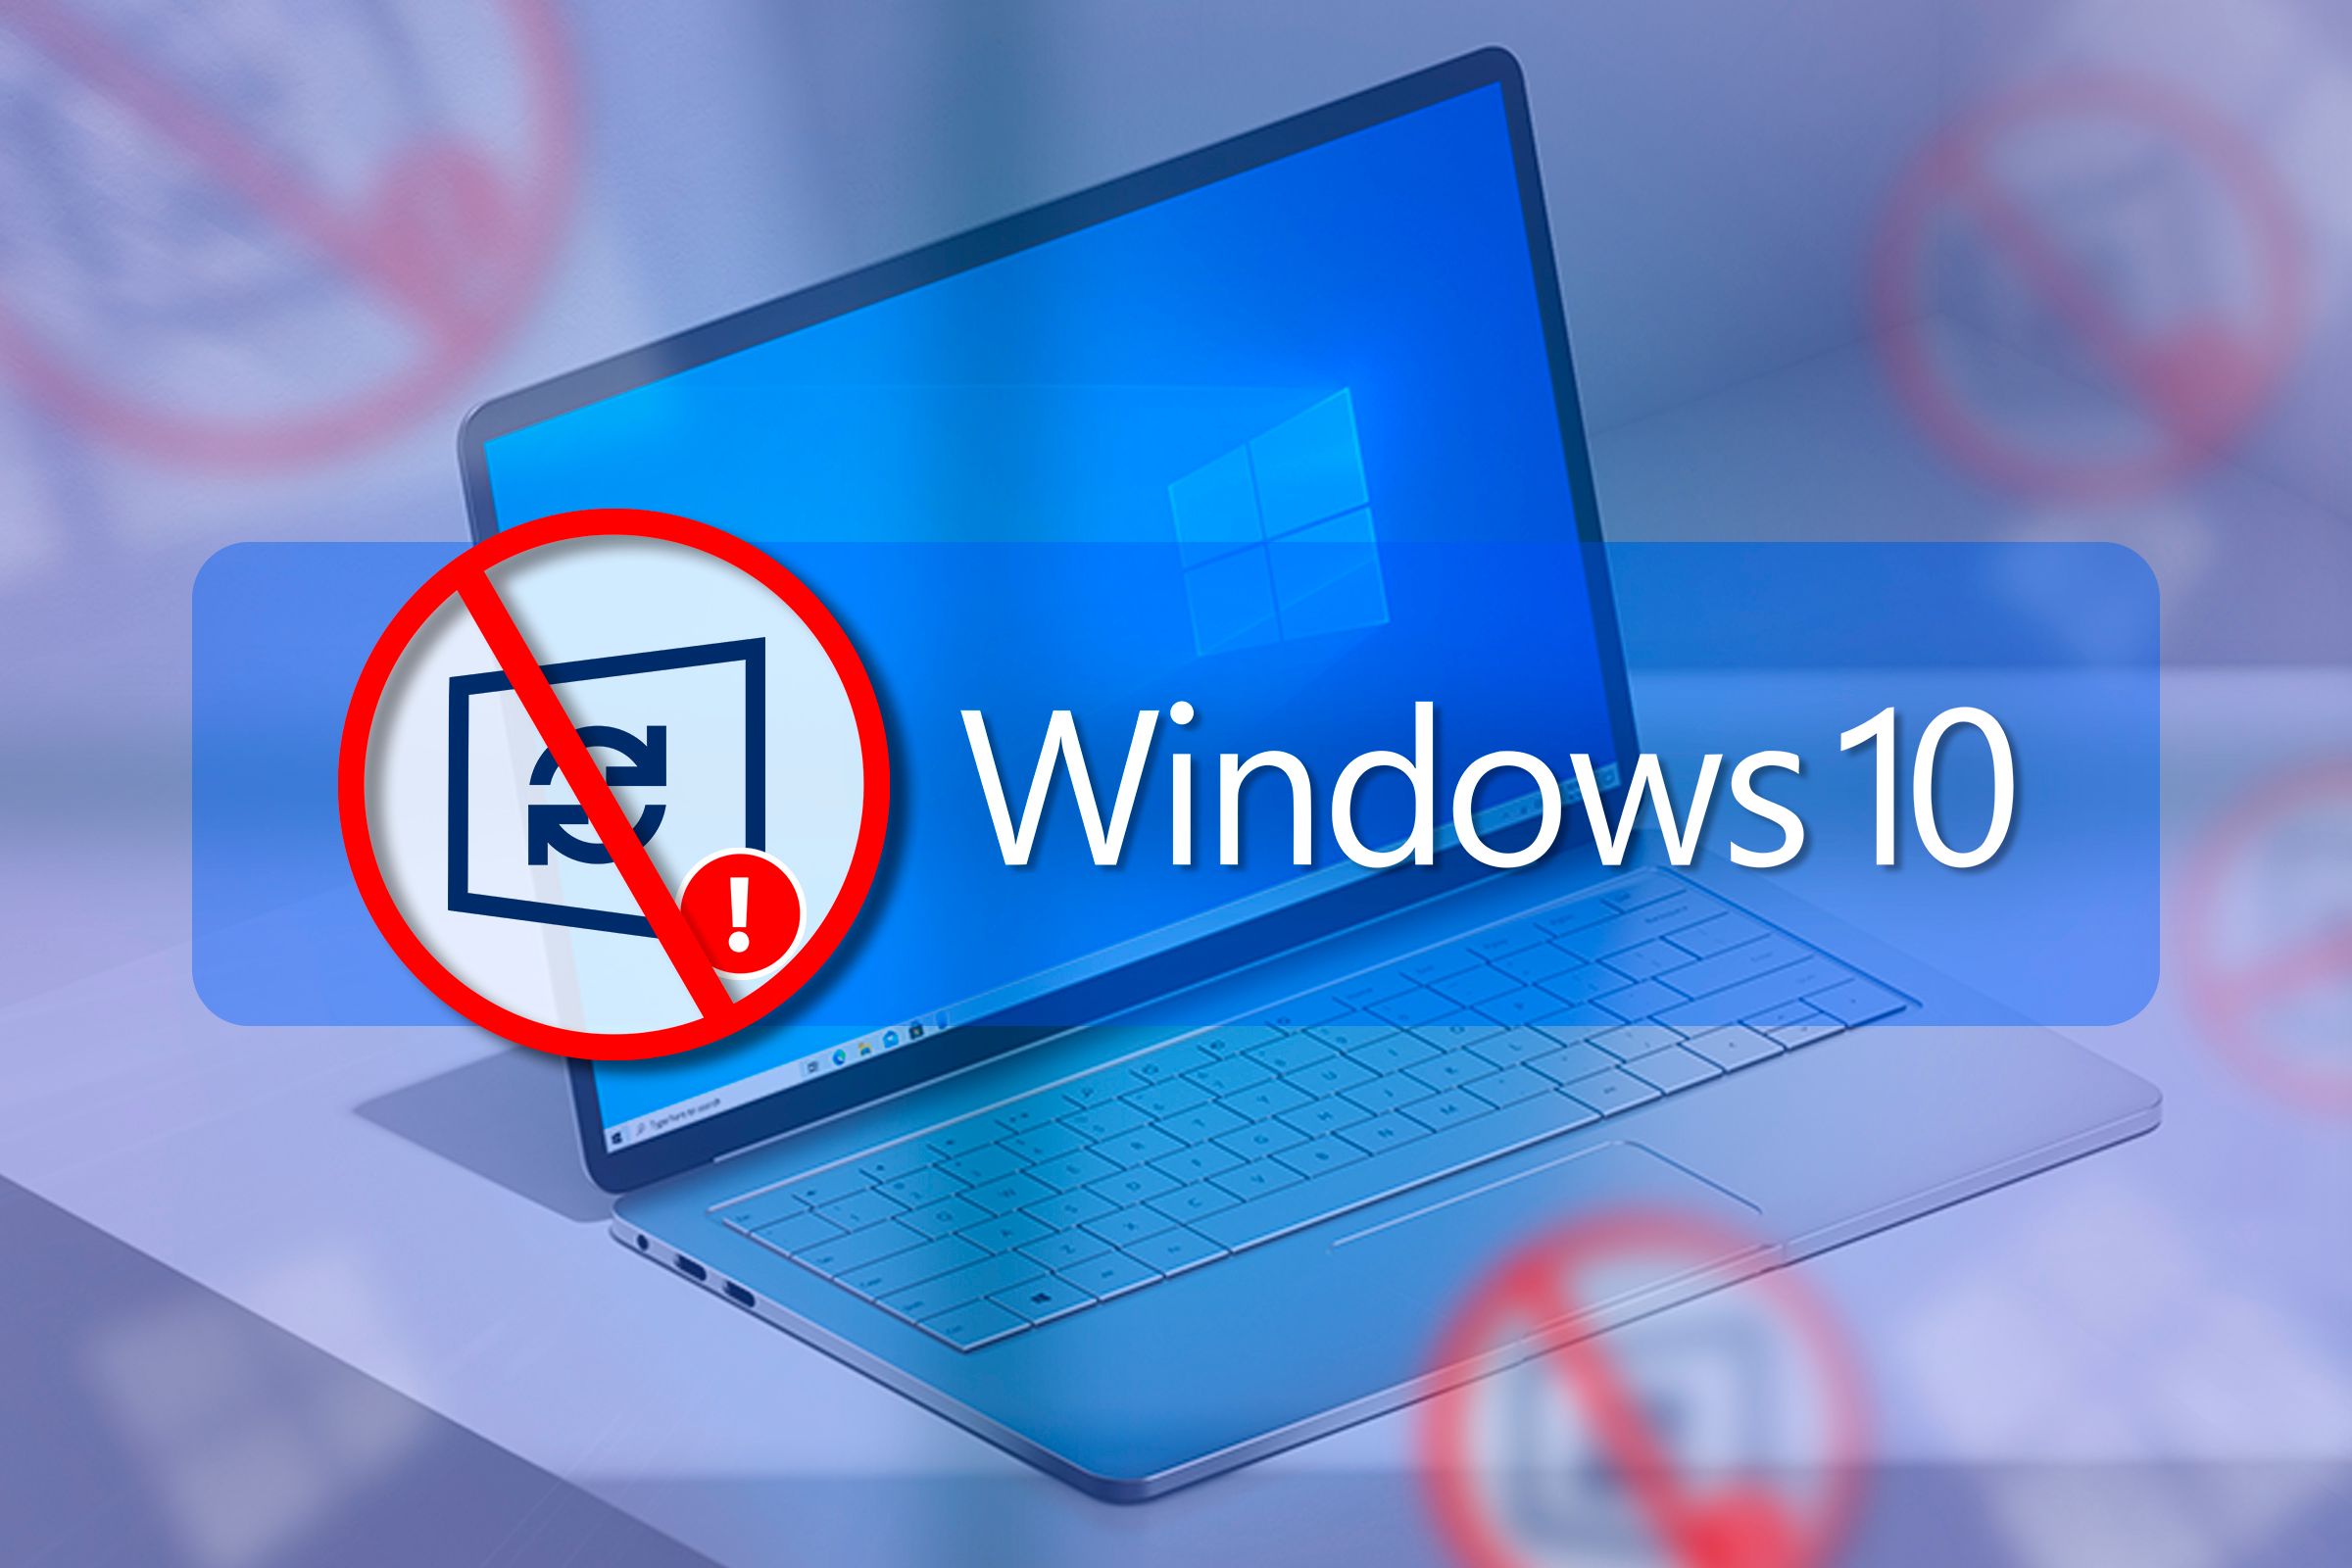 Laptop with Windows 10 and a 'no updates' icon next to the text 'Windows 10'.